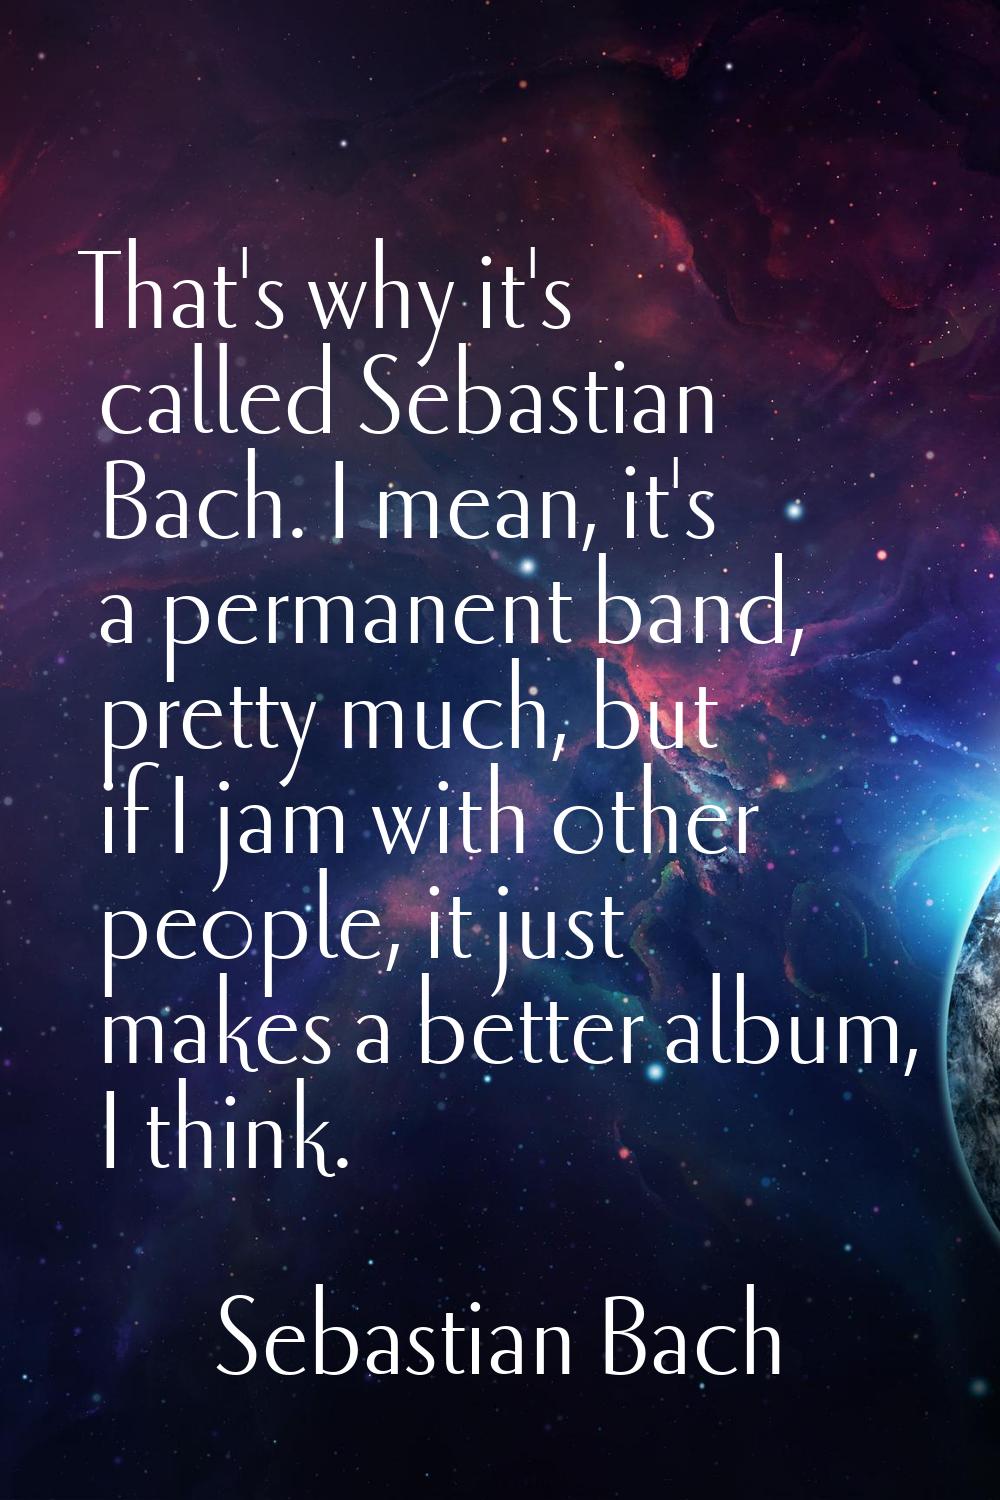 That's why it's called Sebastian Bach. I mean, it's a permanent band, pretty much, but if I jam wit